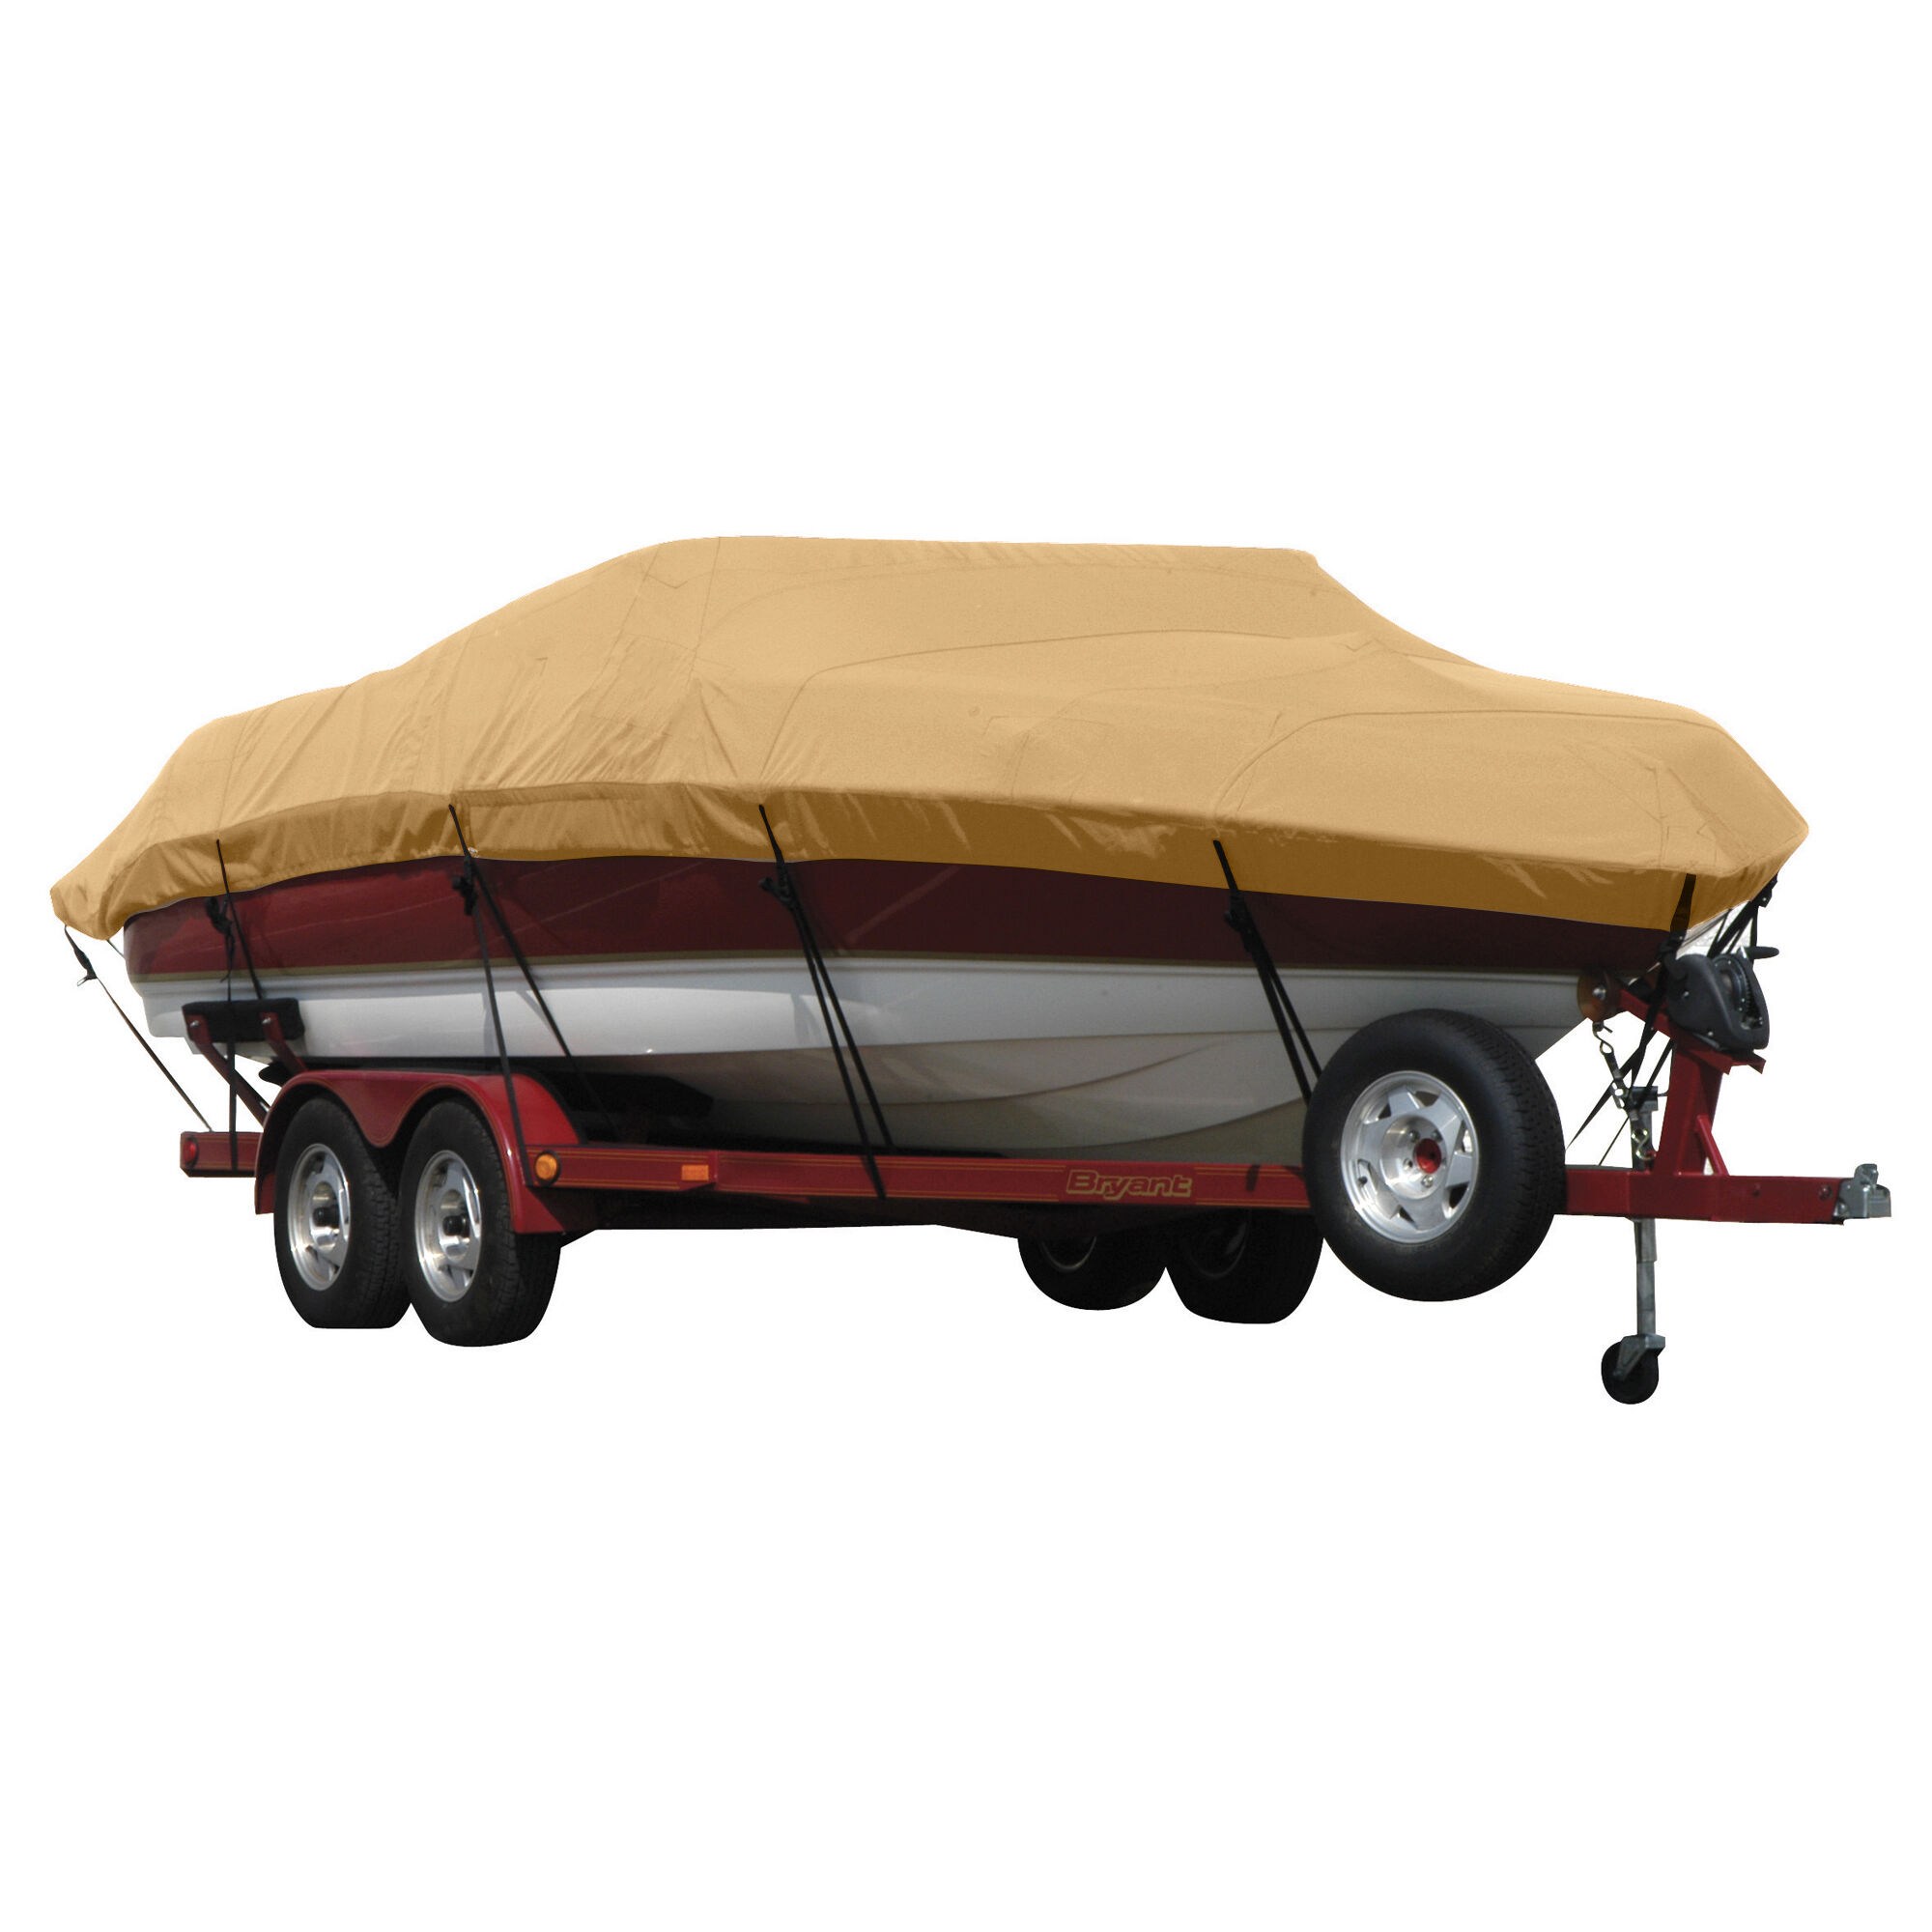 Covermate Sunbrella Boat Cover For Moomba Boomerang Cb (Does Not Cover PLATFORMm) in Toast